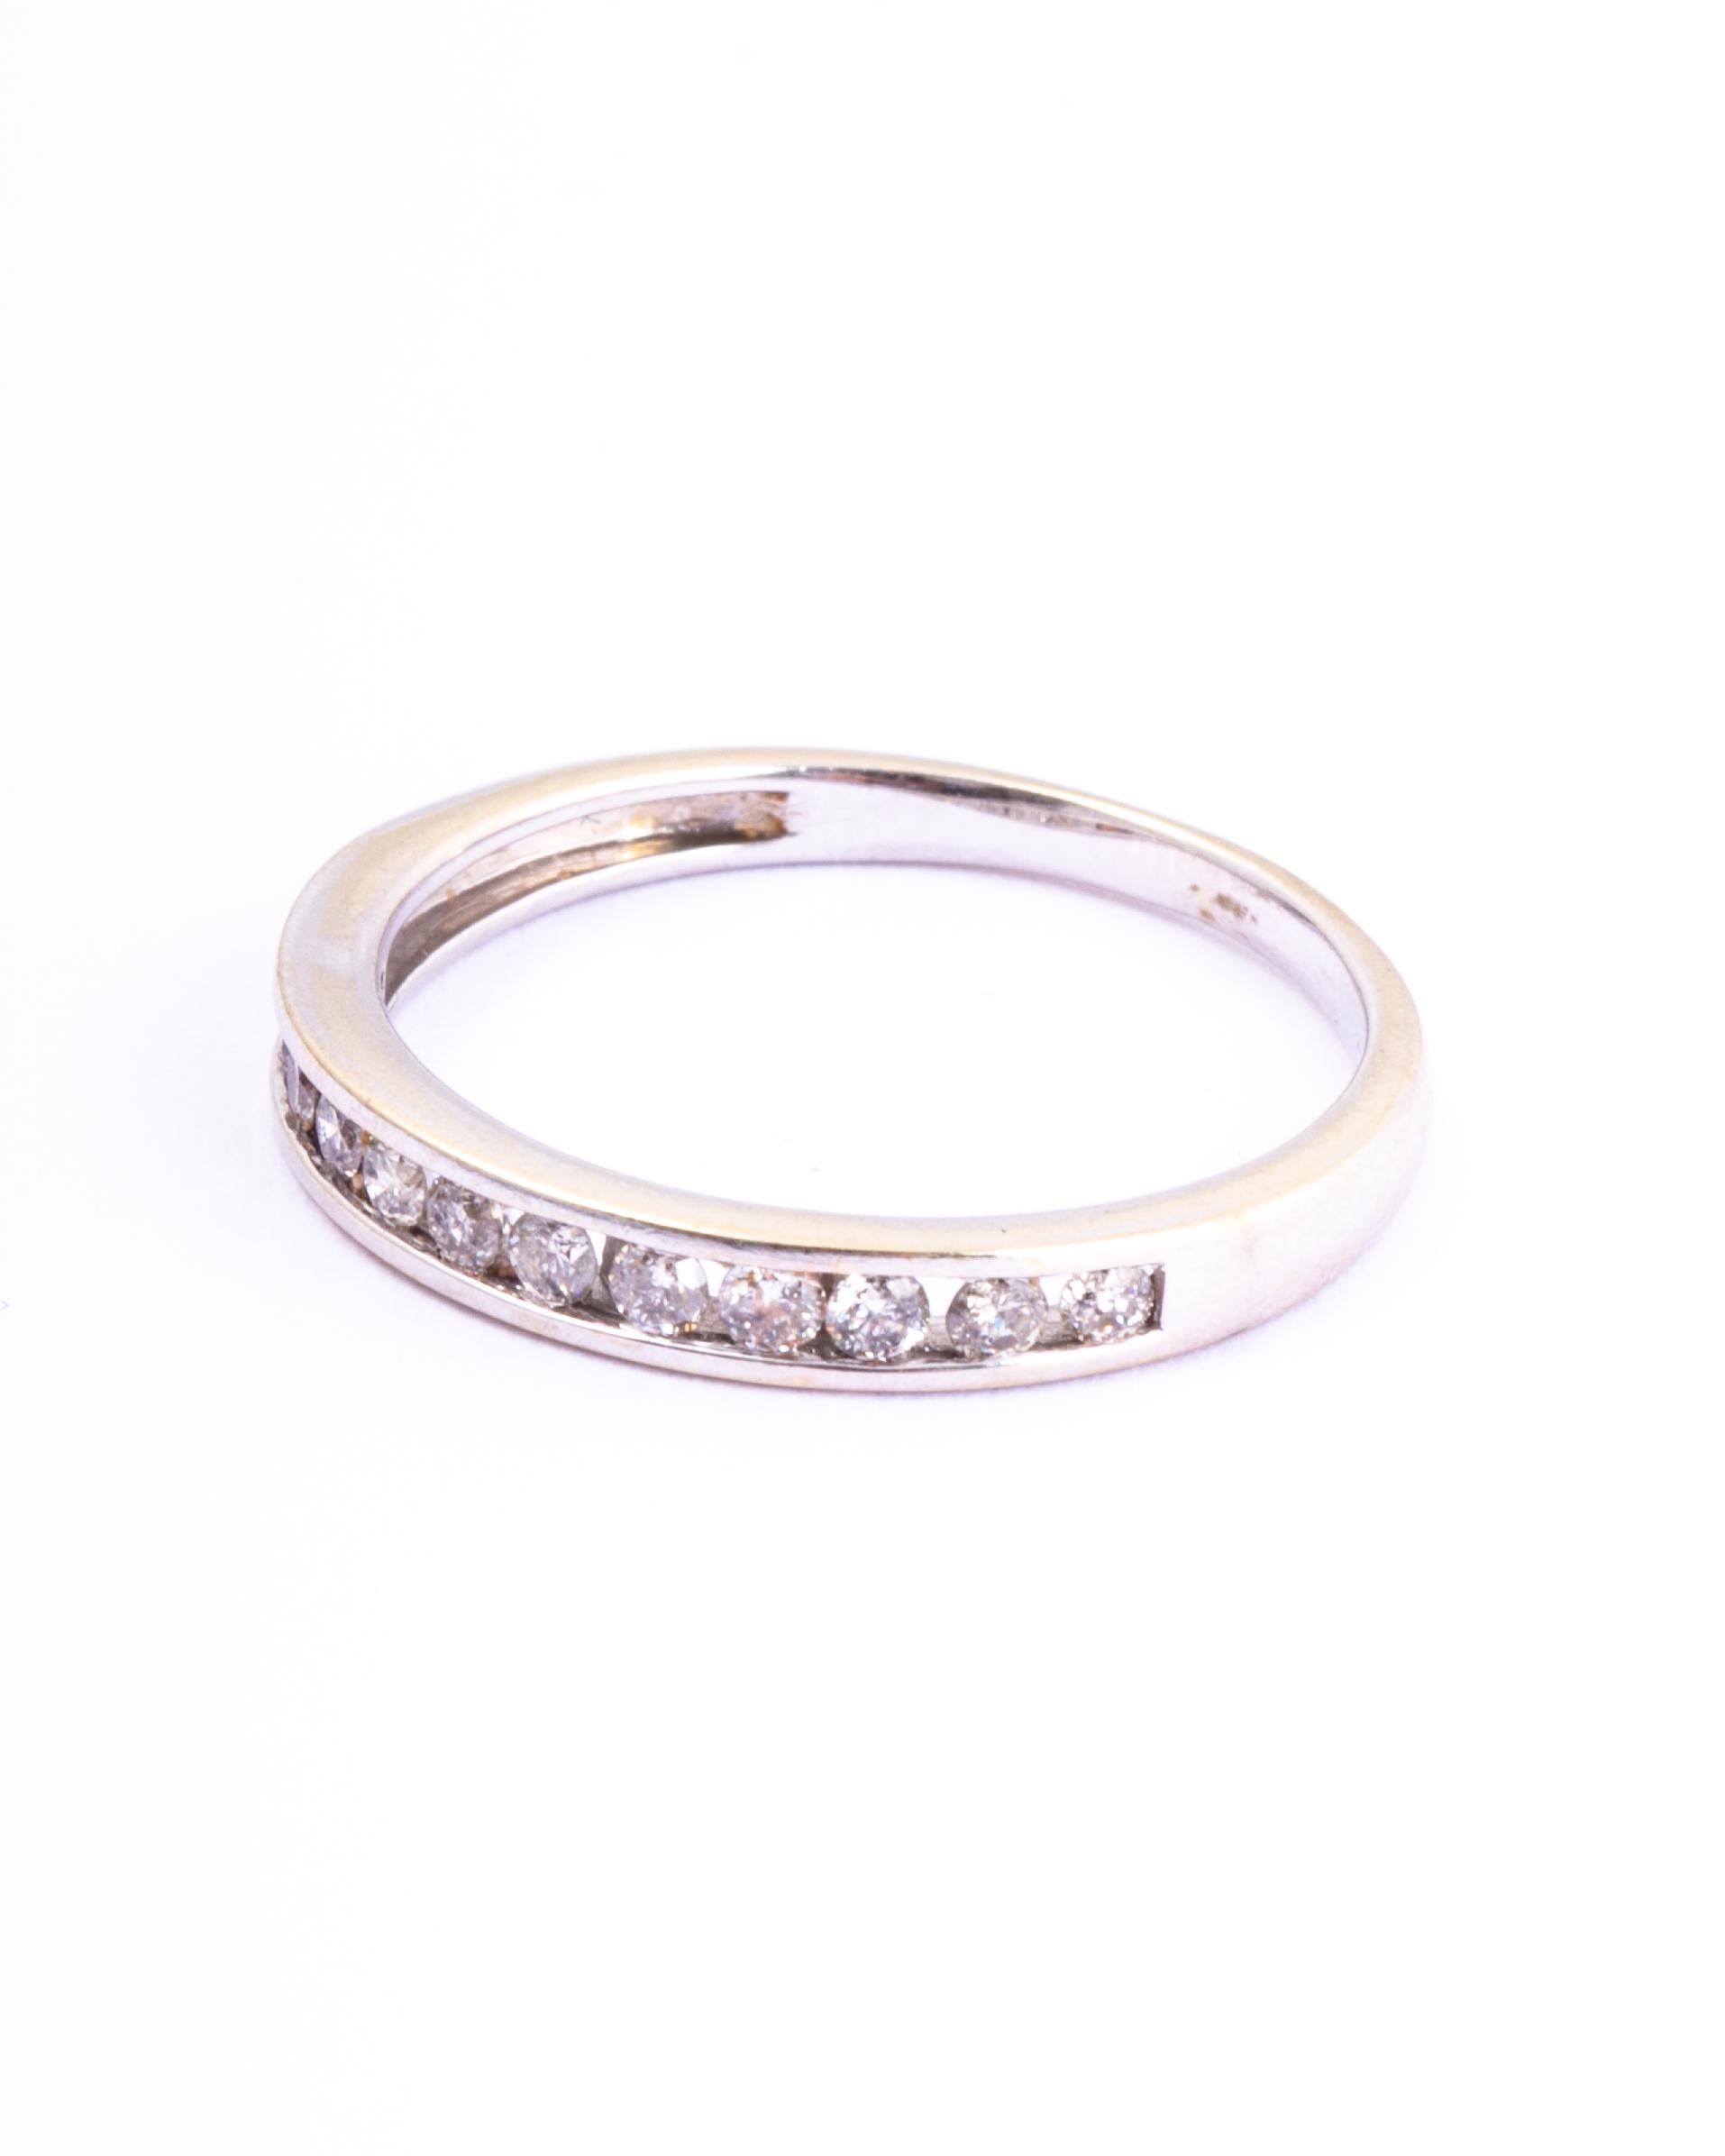 This half eternity band holds 25points worth of shimmering diamonds. The stones are set within the smooth 18ct white gold band. 

Ring Size: L or 5 3/4
Band Width: 2mm 

Weight: 1.9g